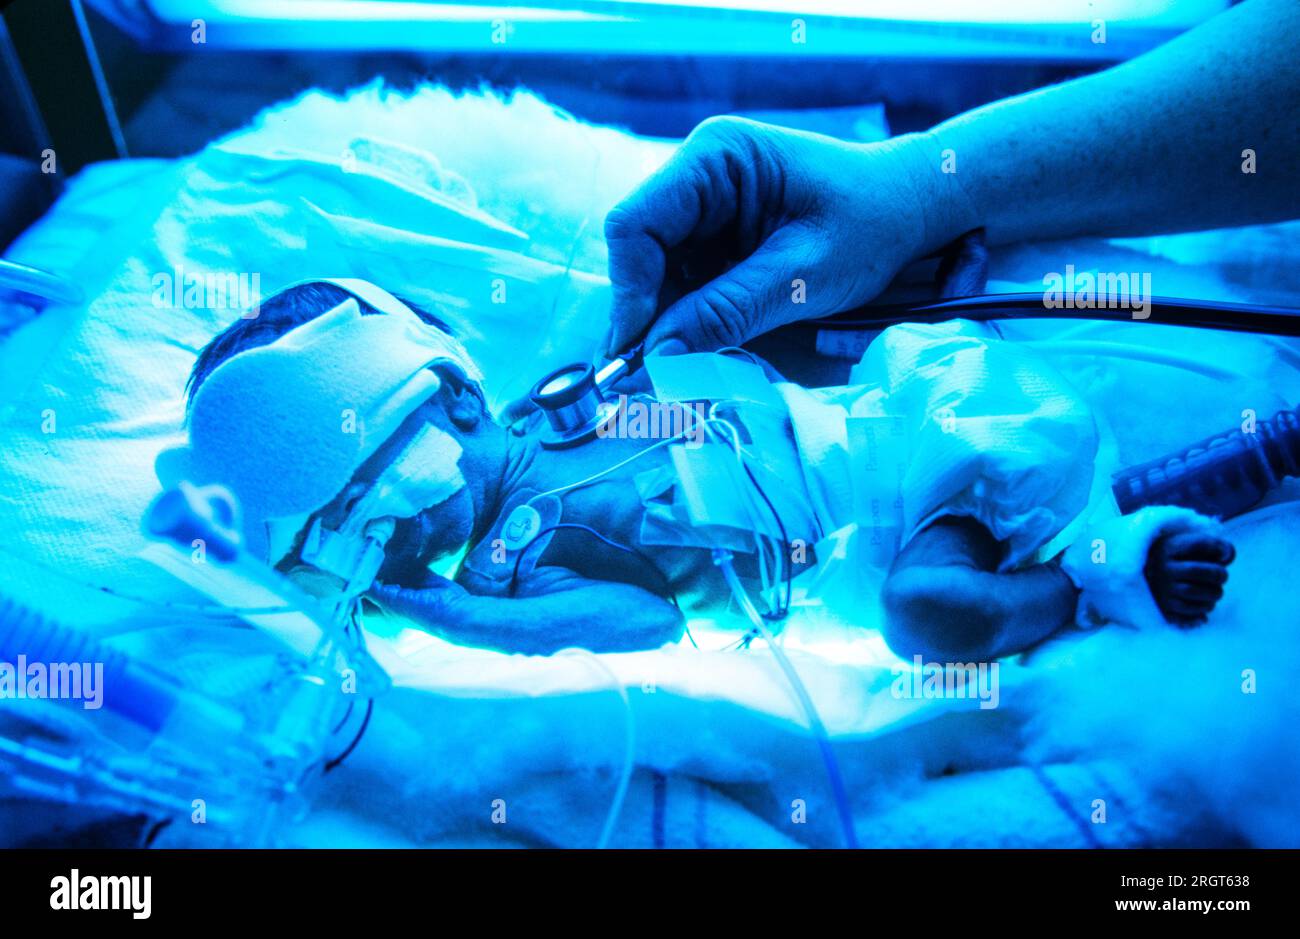 A neonatal intensive care hospital doctor monitors  a tiny premature infant under blue ultraviolet light. Stock Photo